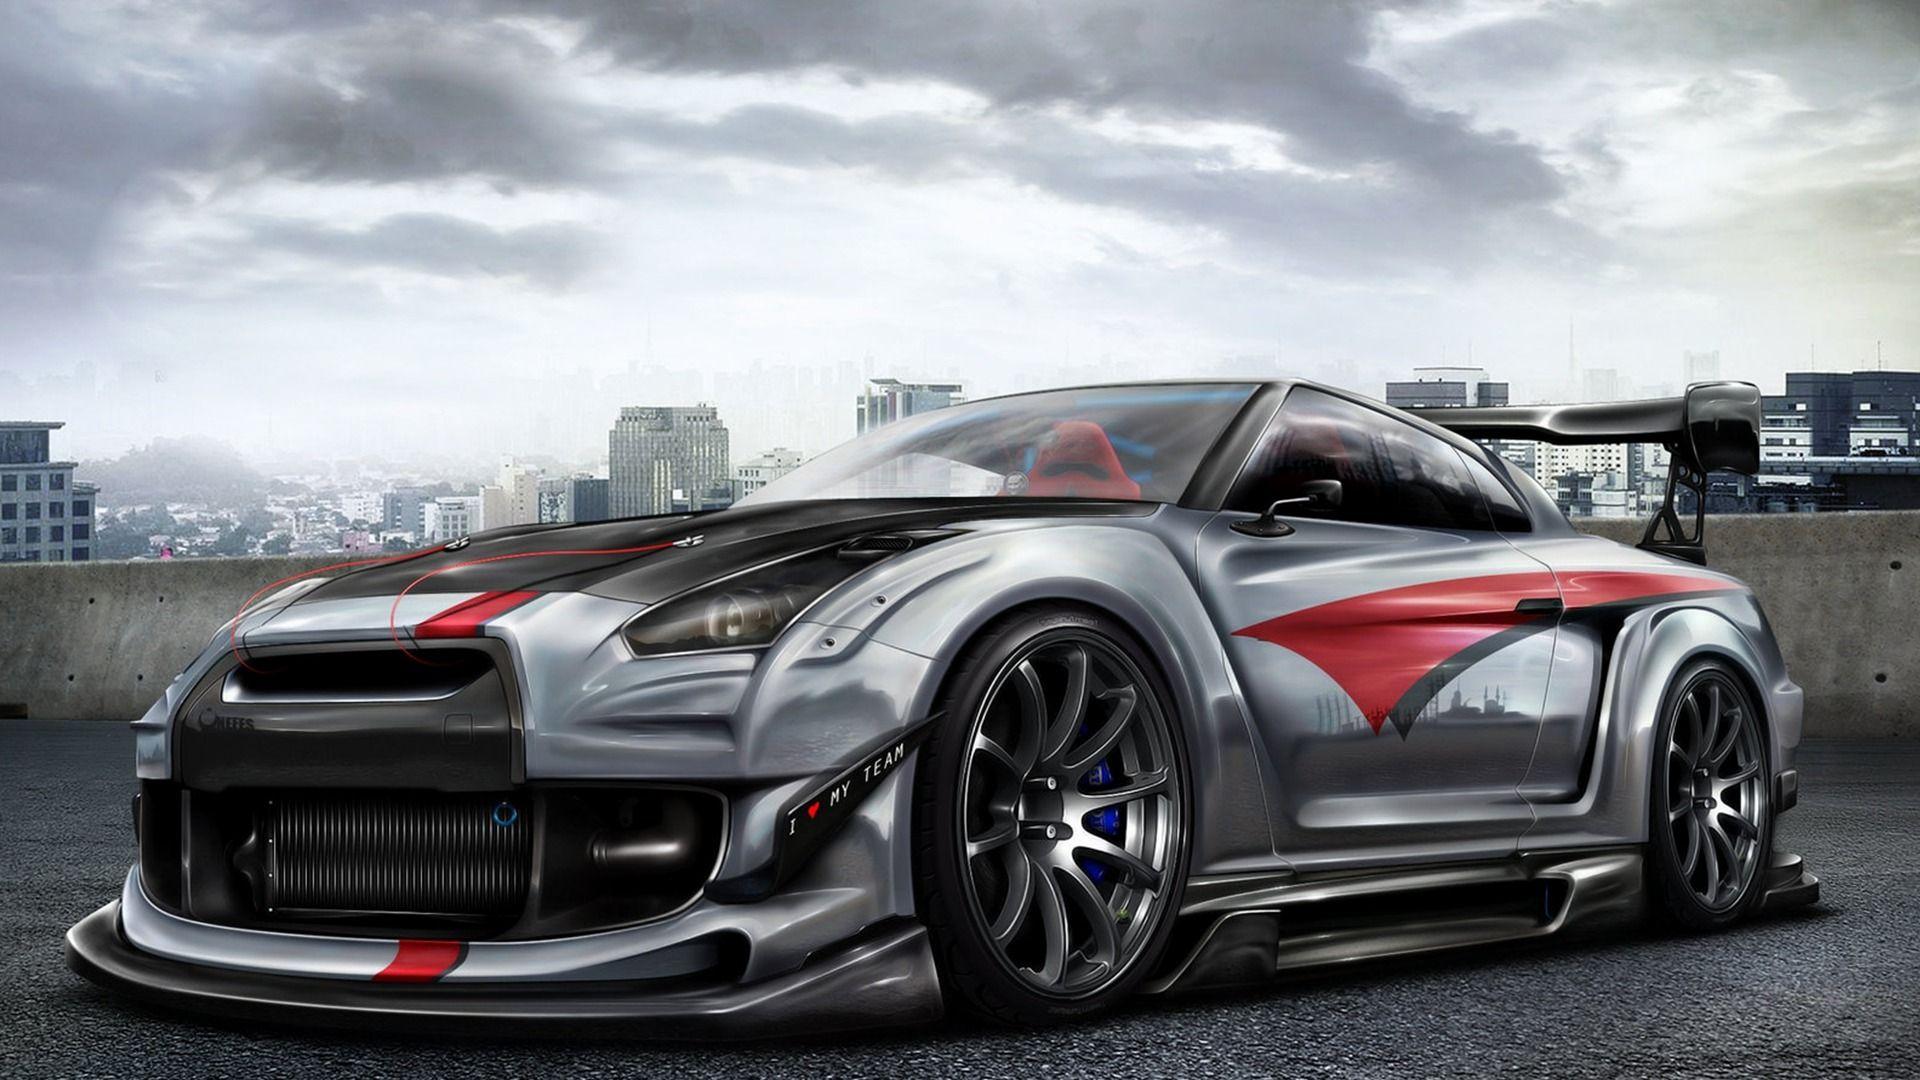 nissan gtr 35 iPhone Wallpapers Free Download